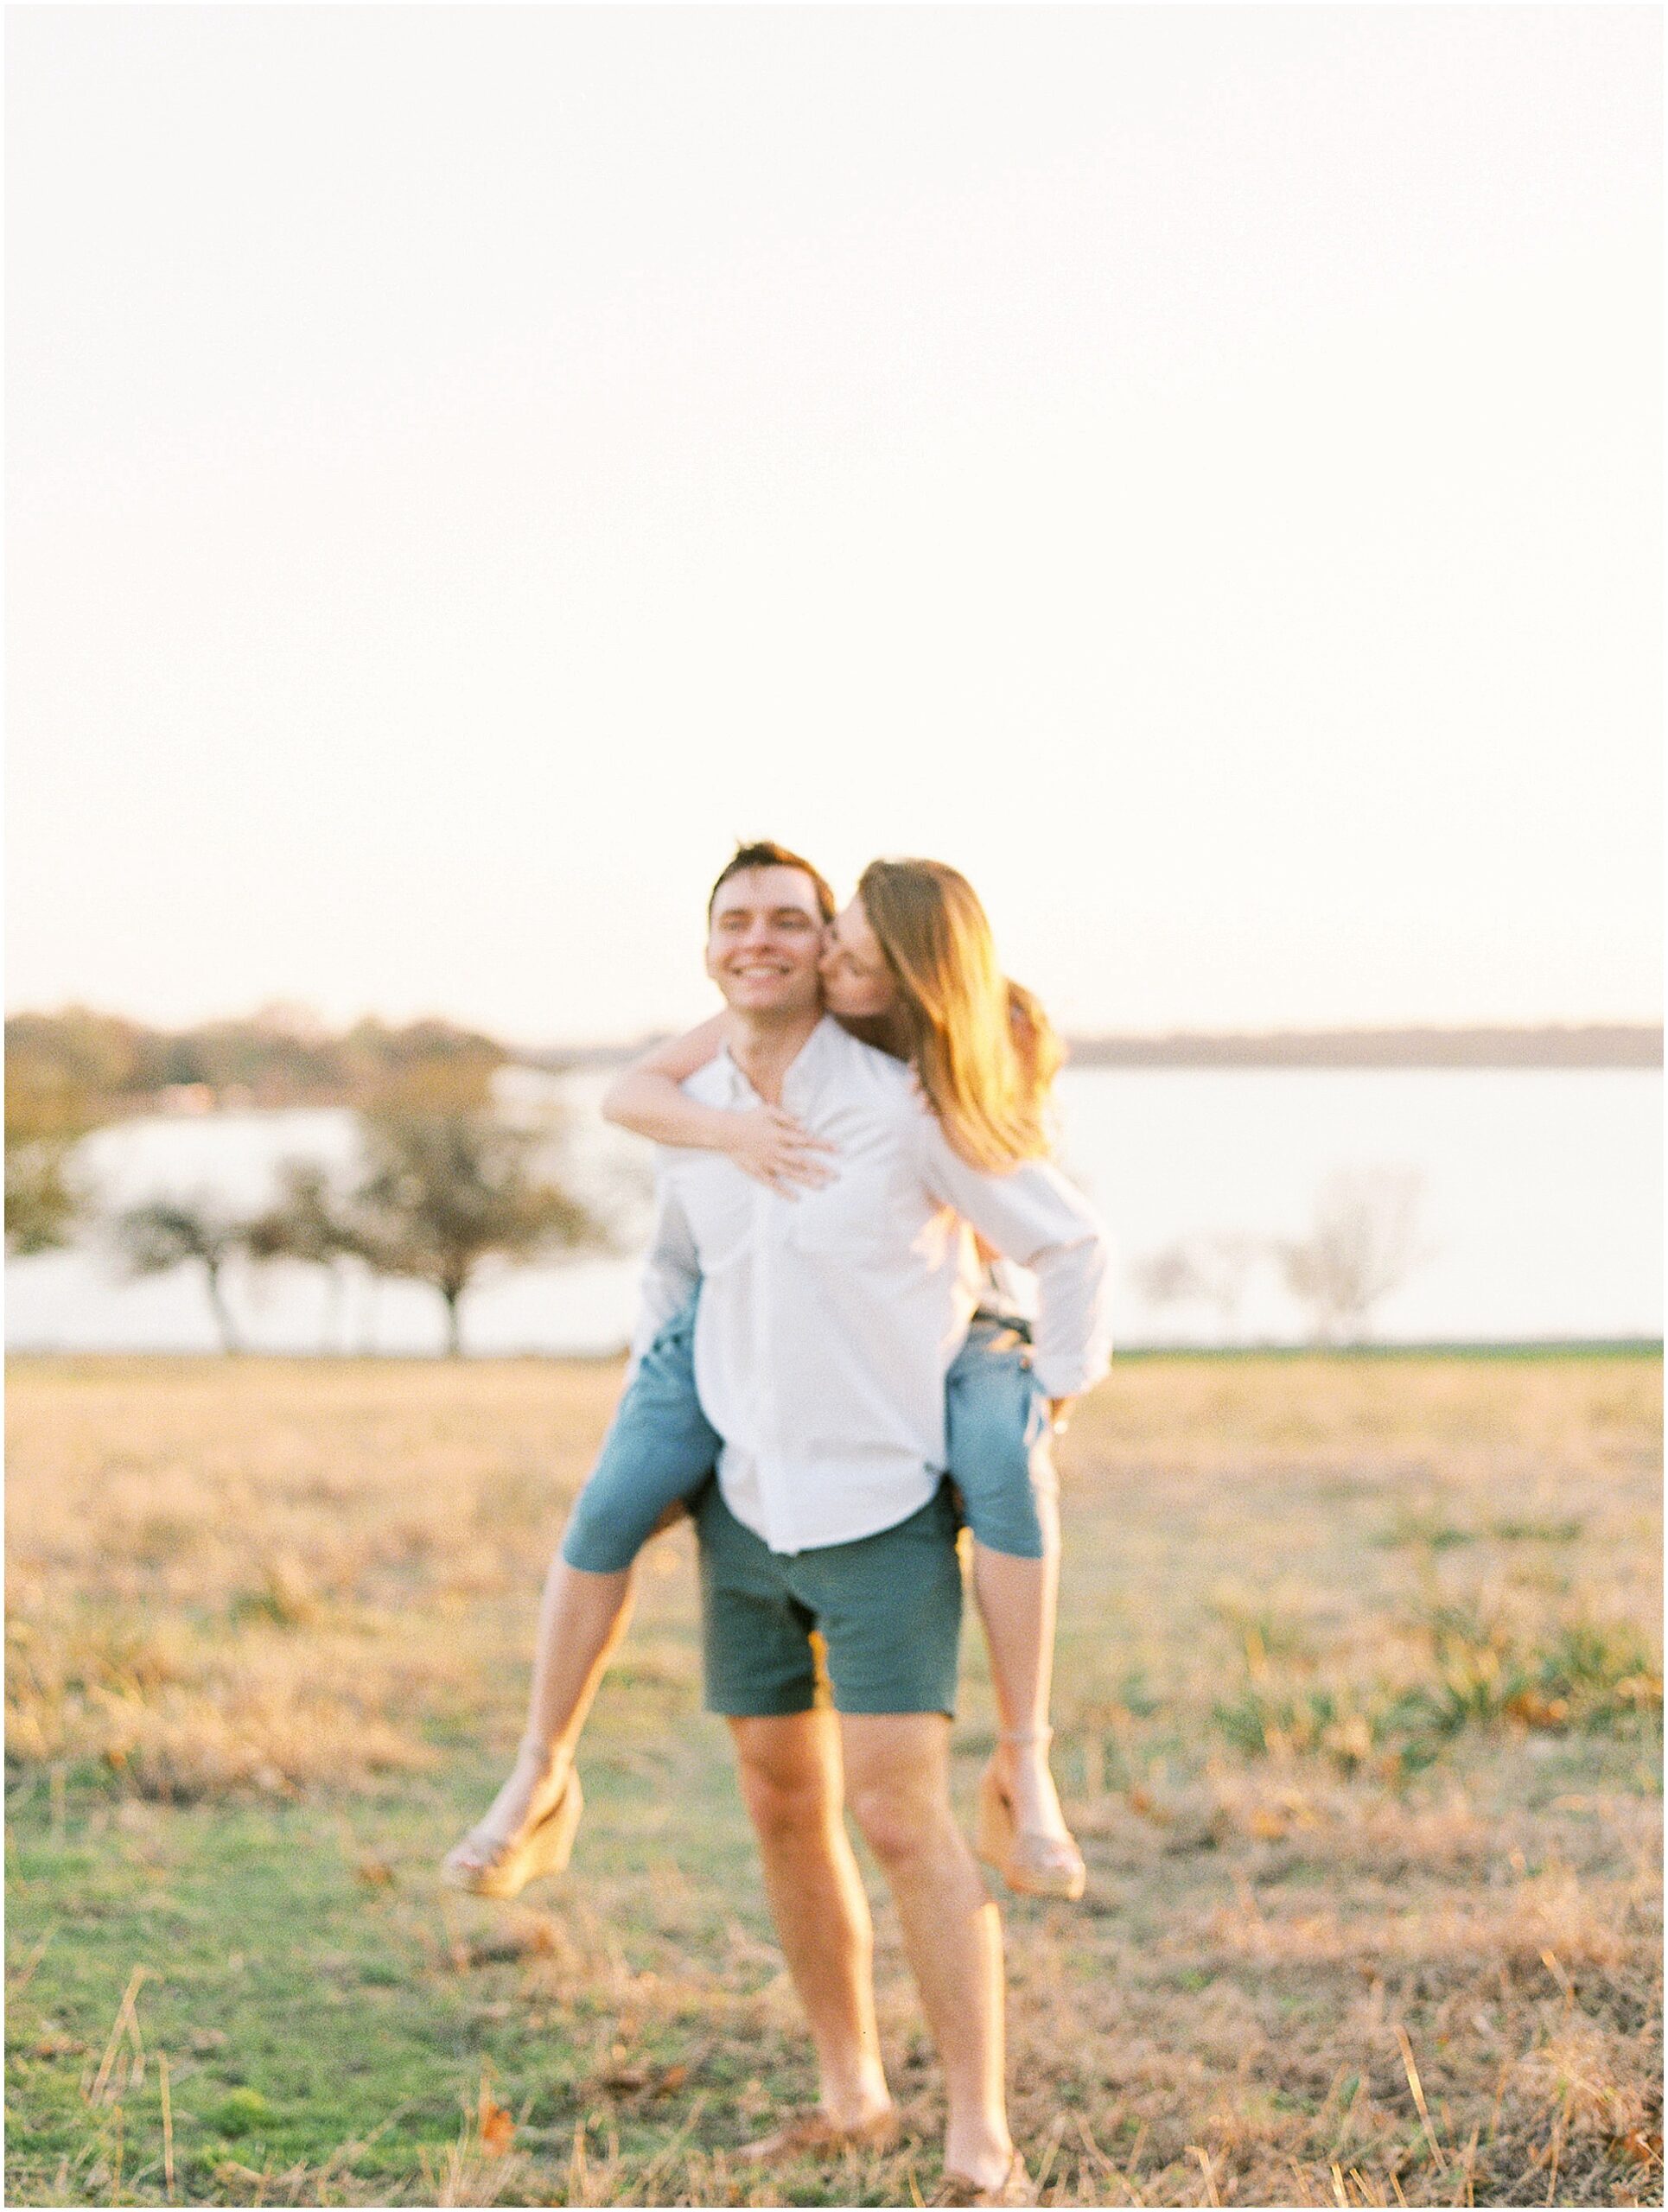 Erin and Zach embracing on a rustic wooden dock at White Rock Lake during their engagement session